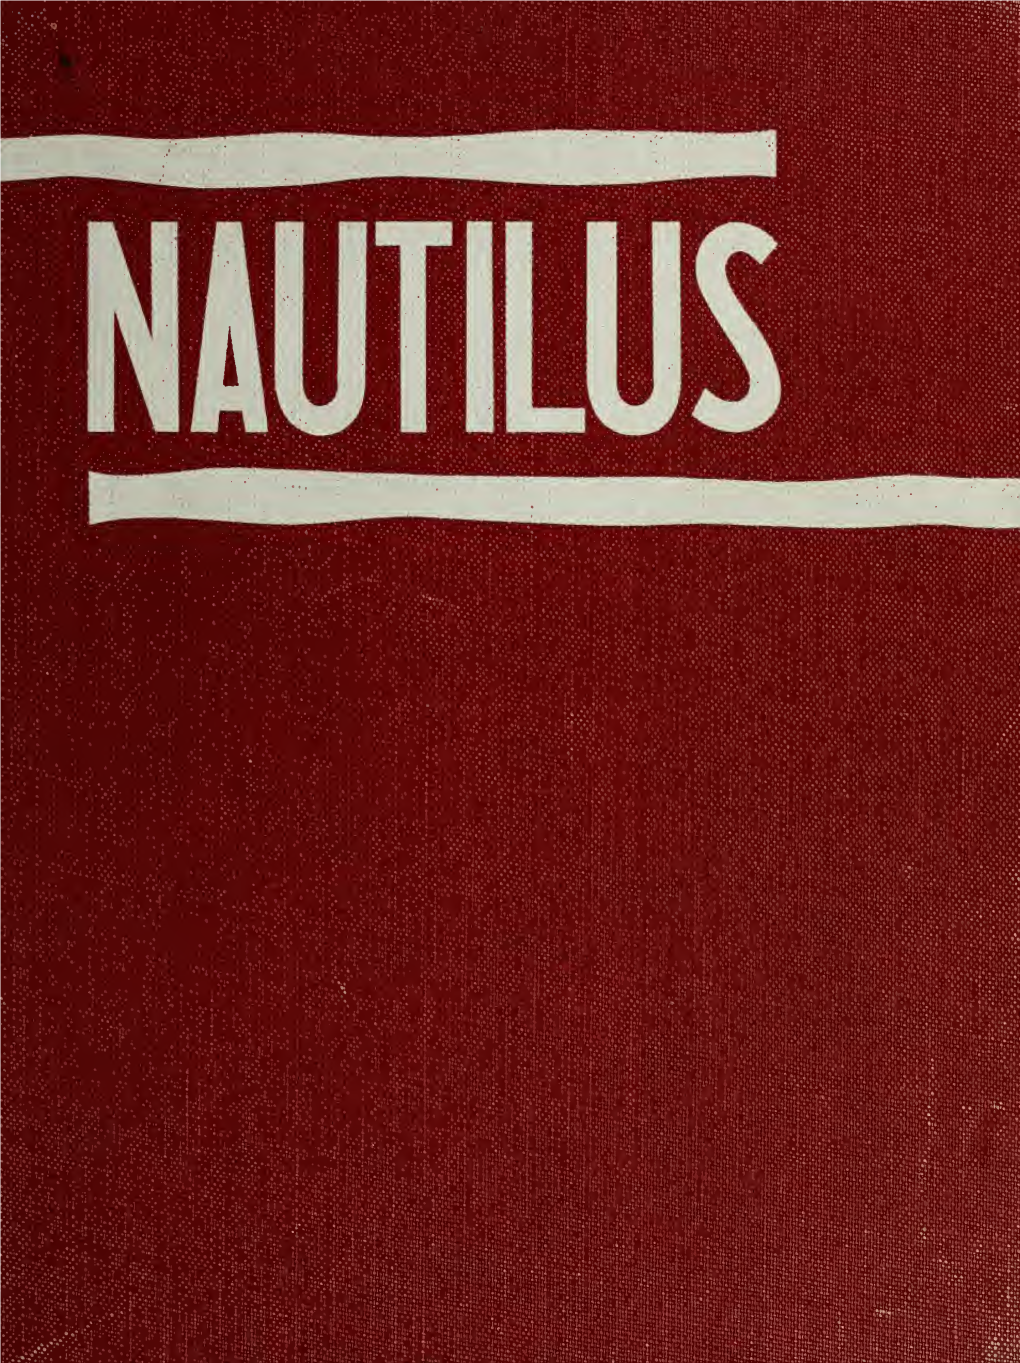 The NAUTILUS Staff Has Done All in Its